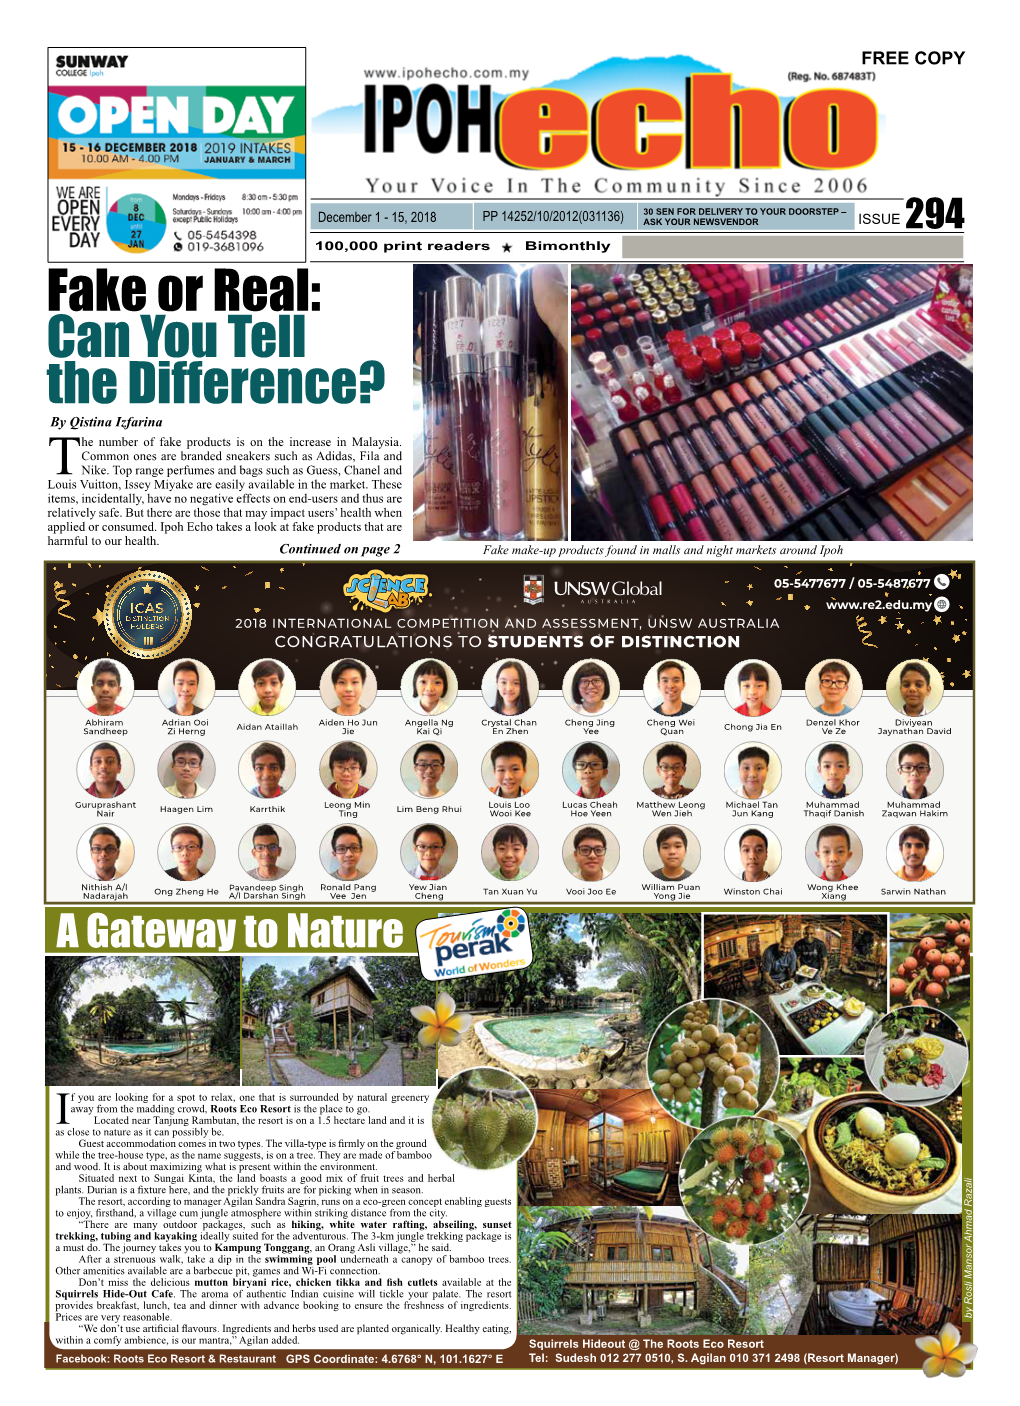 Fake Or Real: Can You Tell the Difference? by Qistina Izfarina He Number of Fake Products Is on the Increase in Malaysia